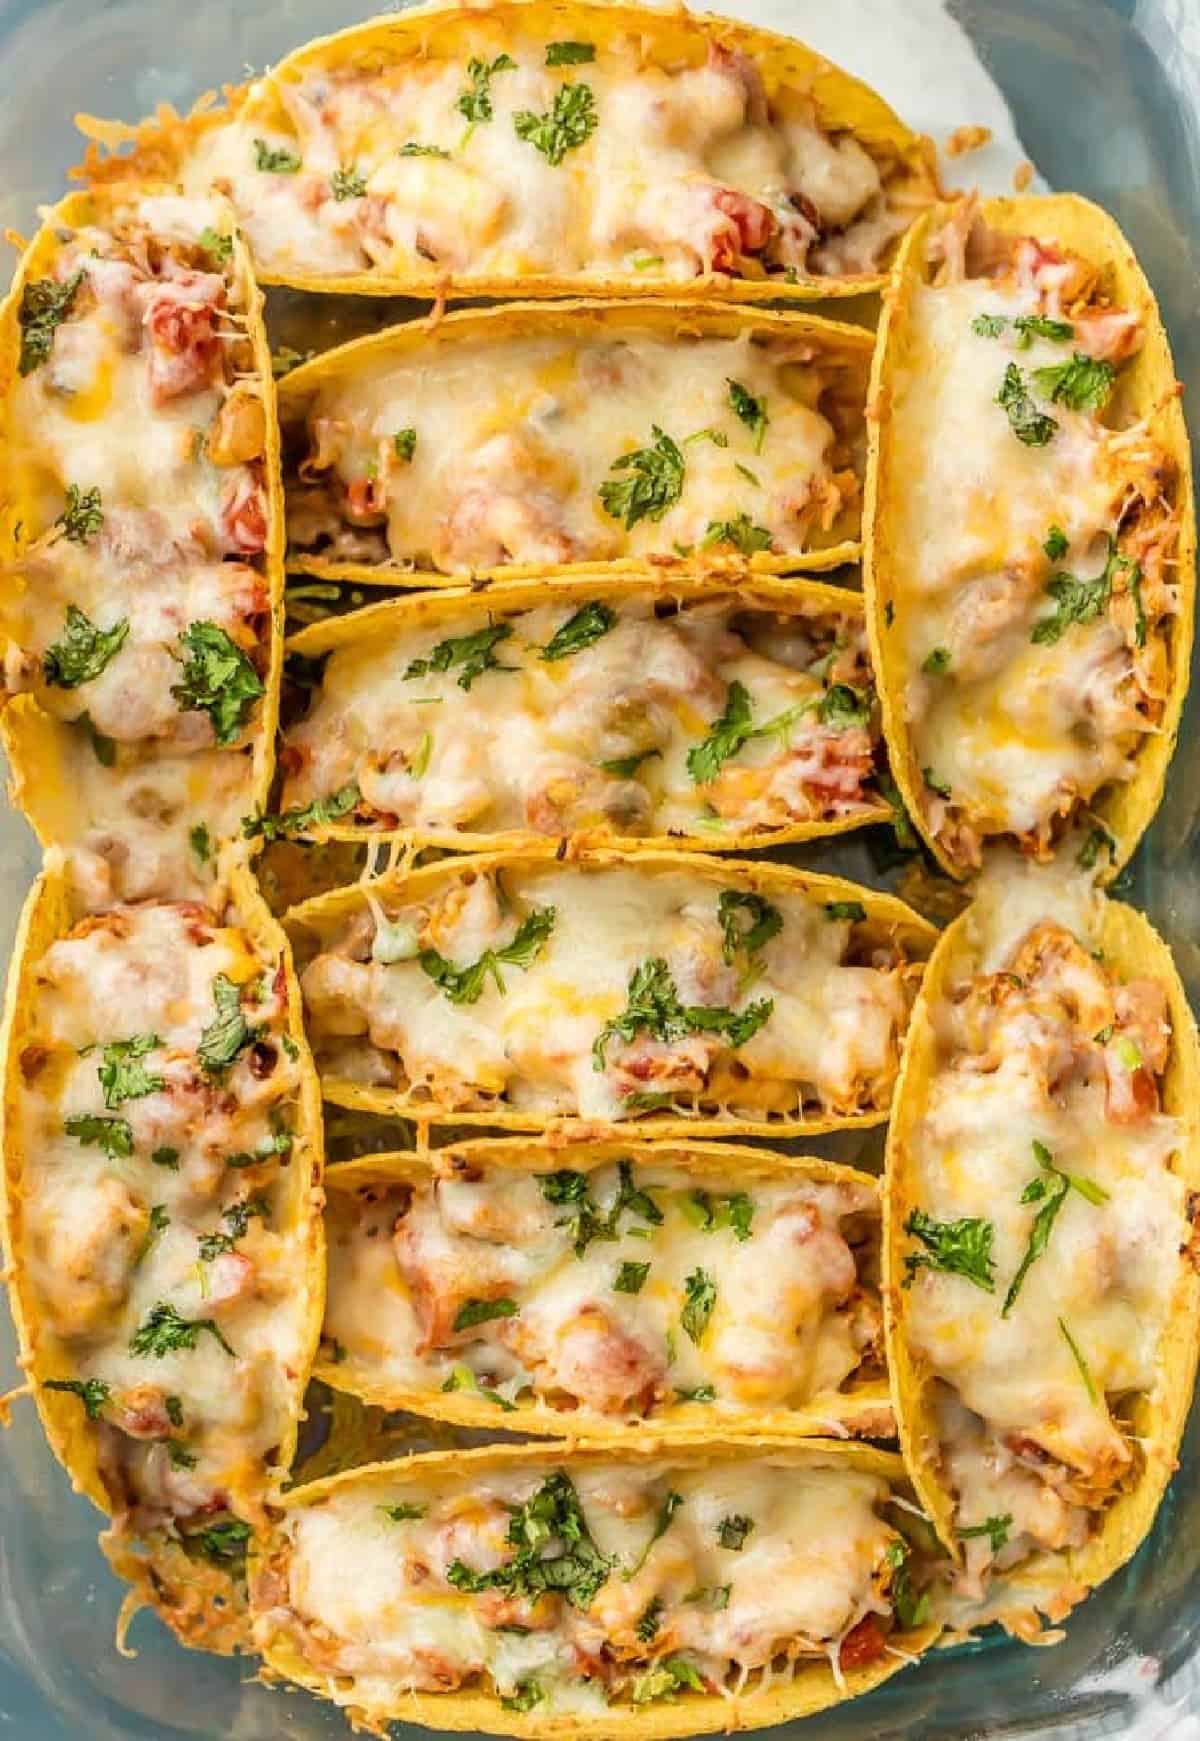 Cheesy chicken tacos baked in a dish.